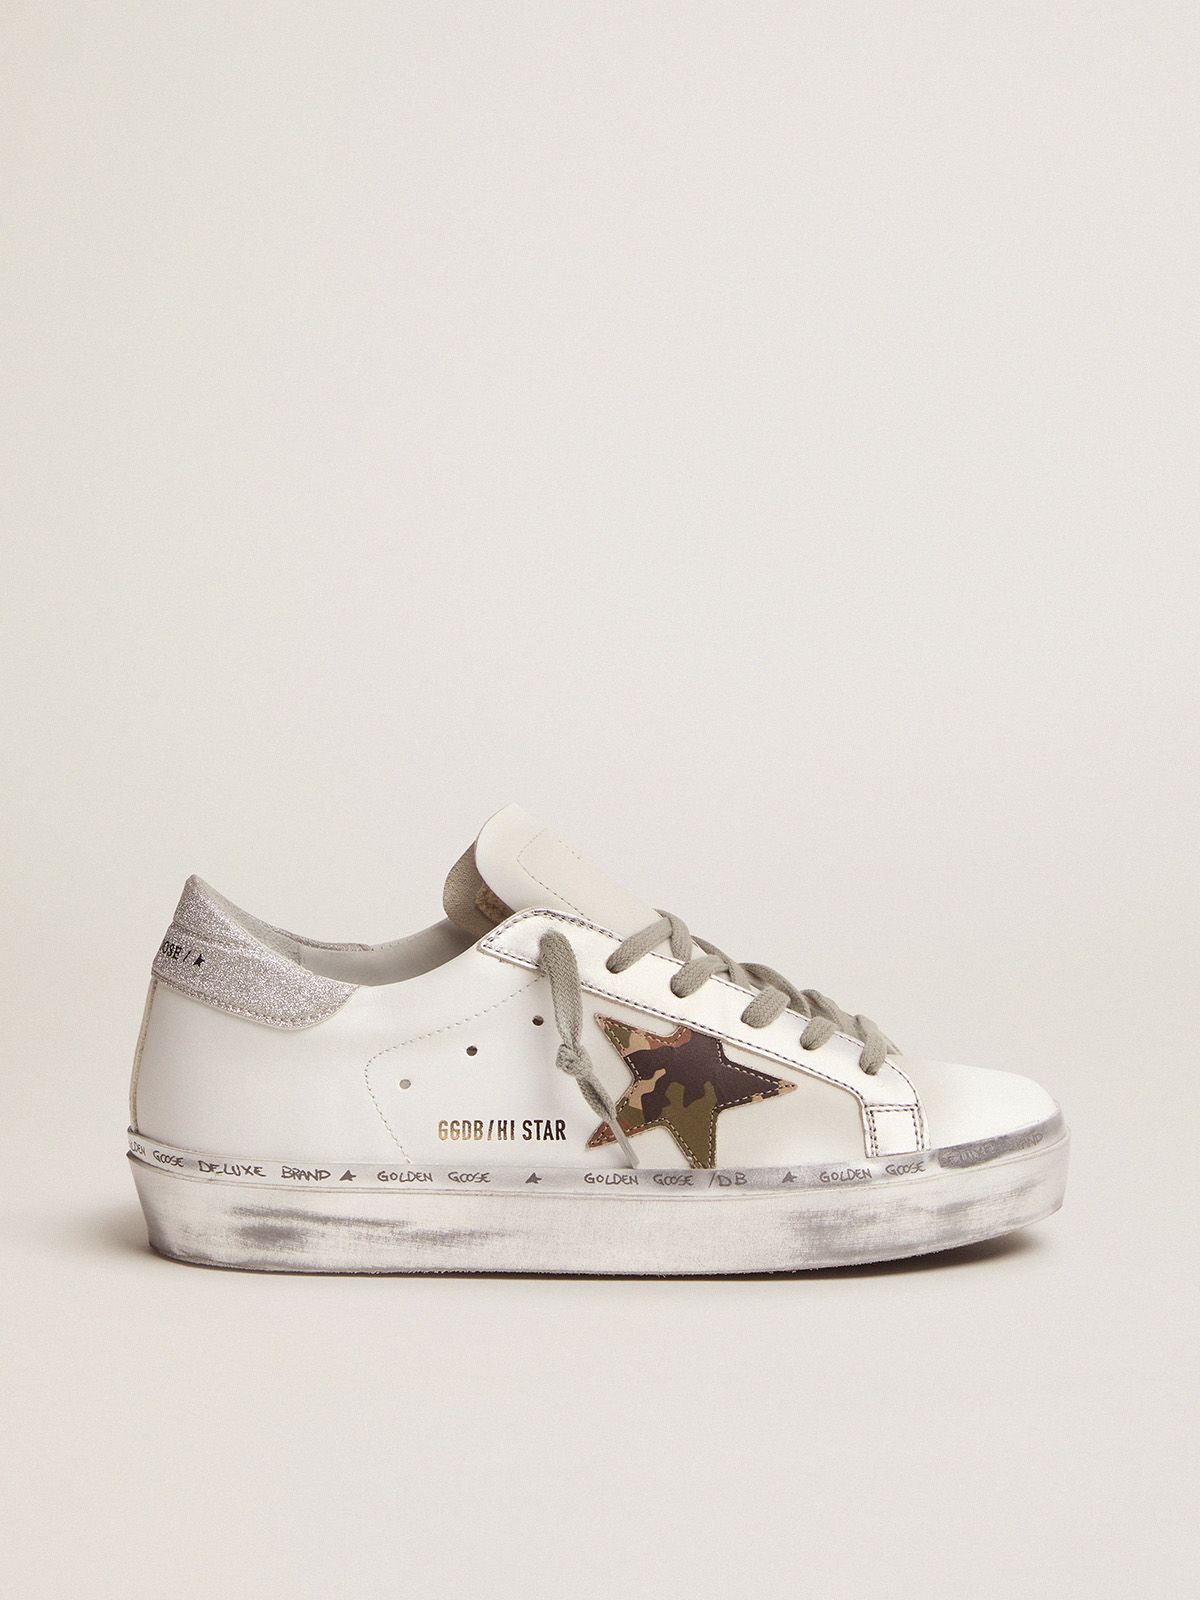 golden goose camouflage glittery Star tab with sneakers and star Hi heel